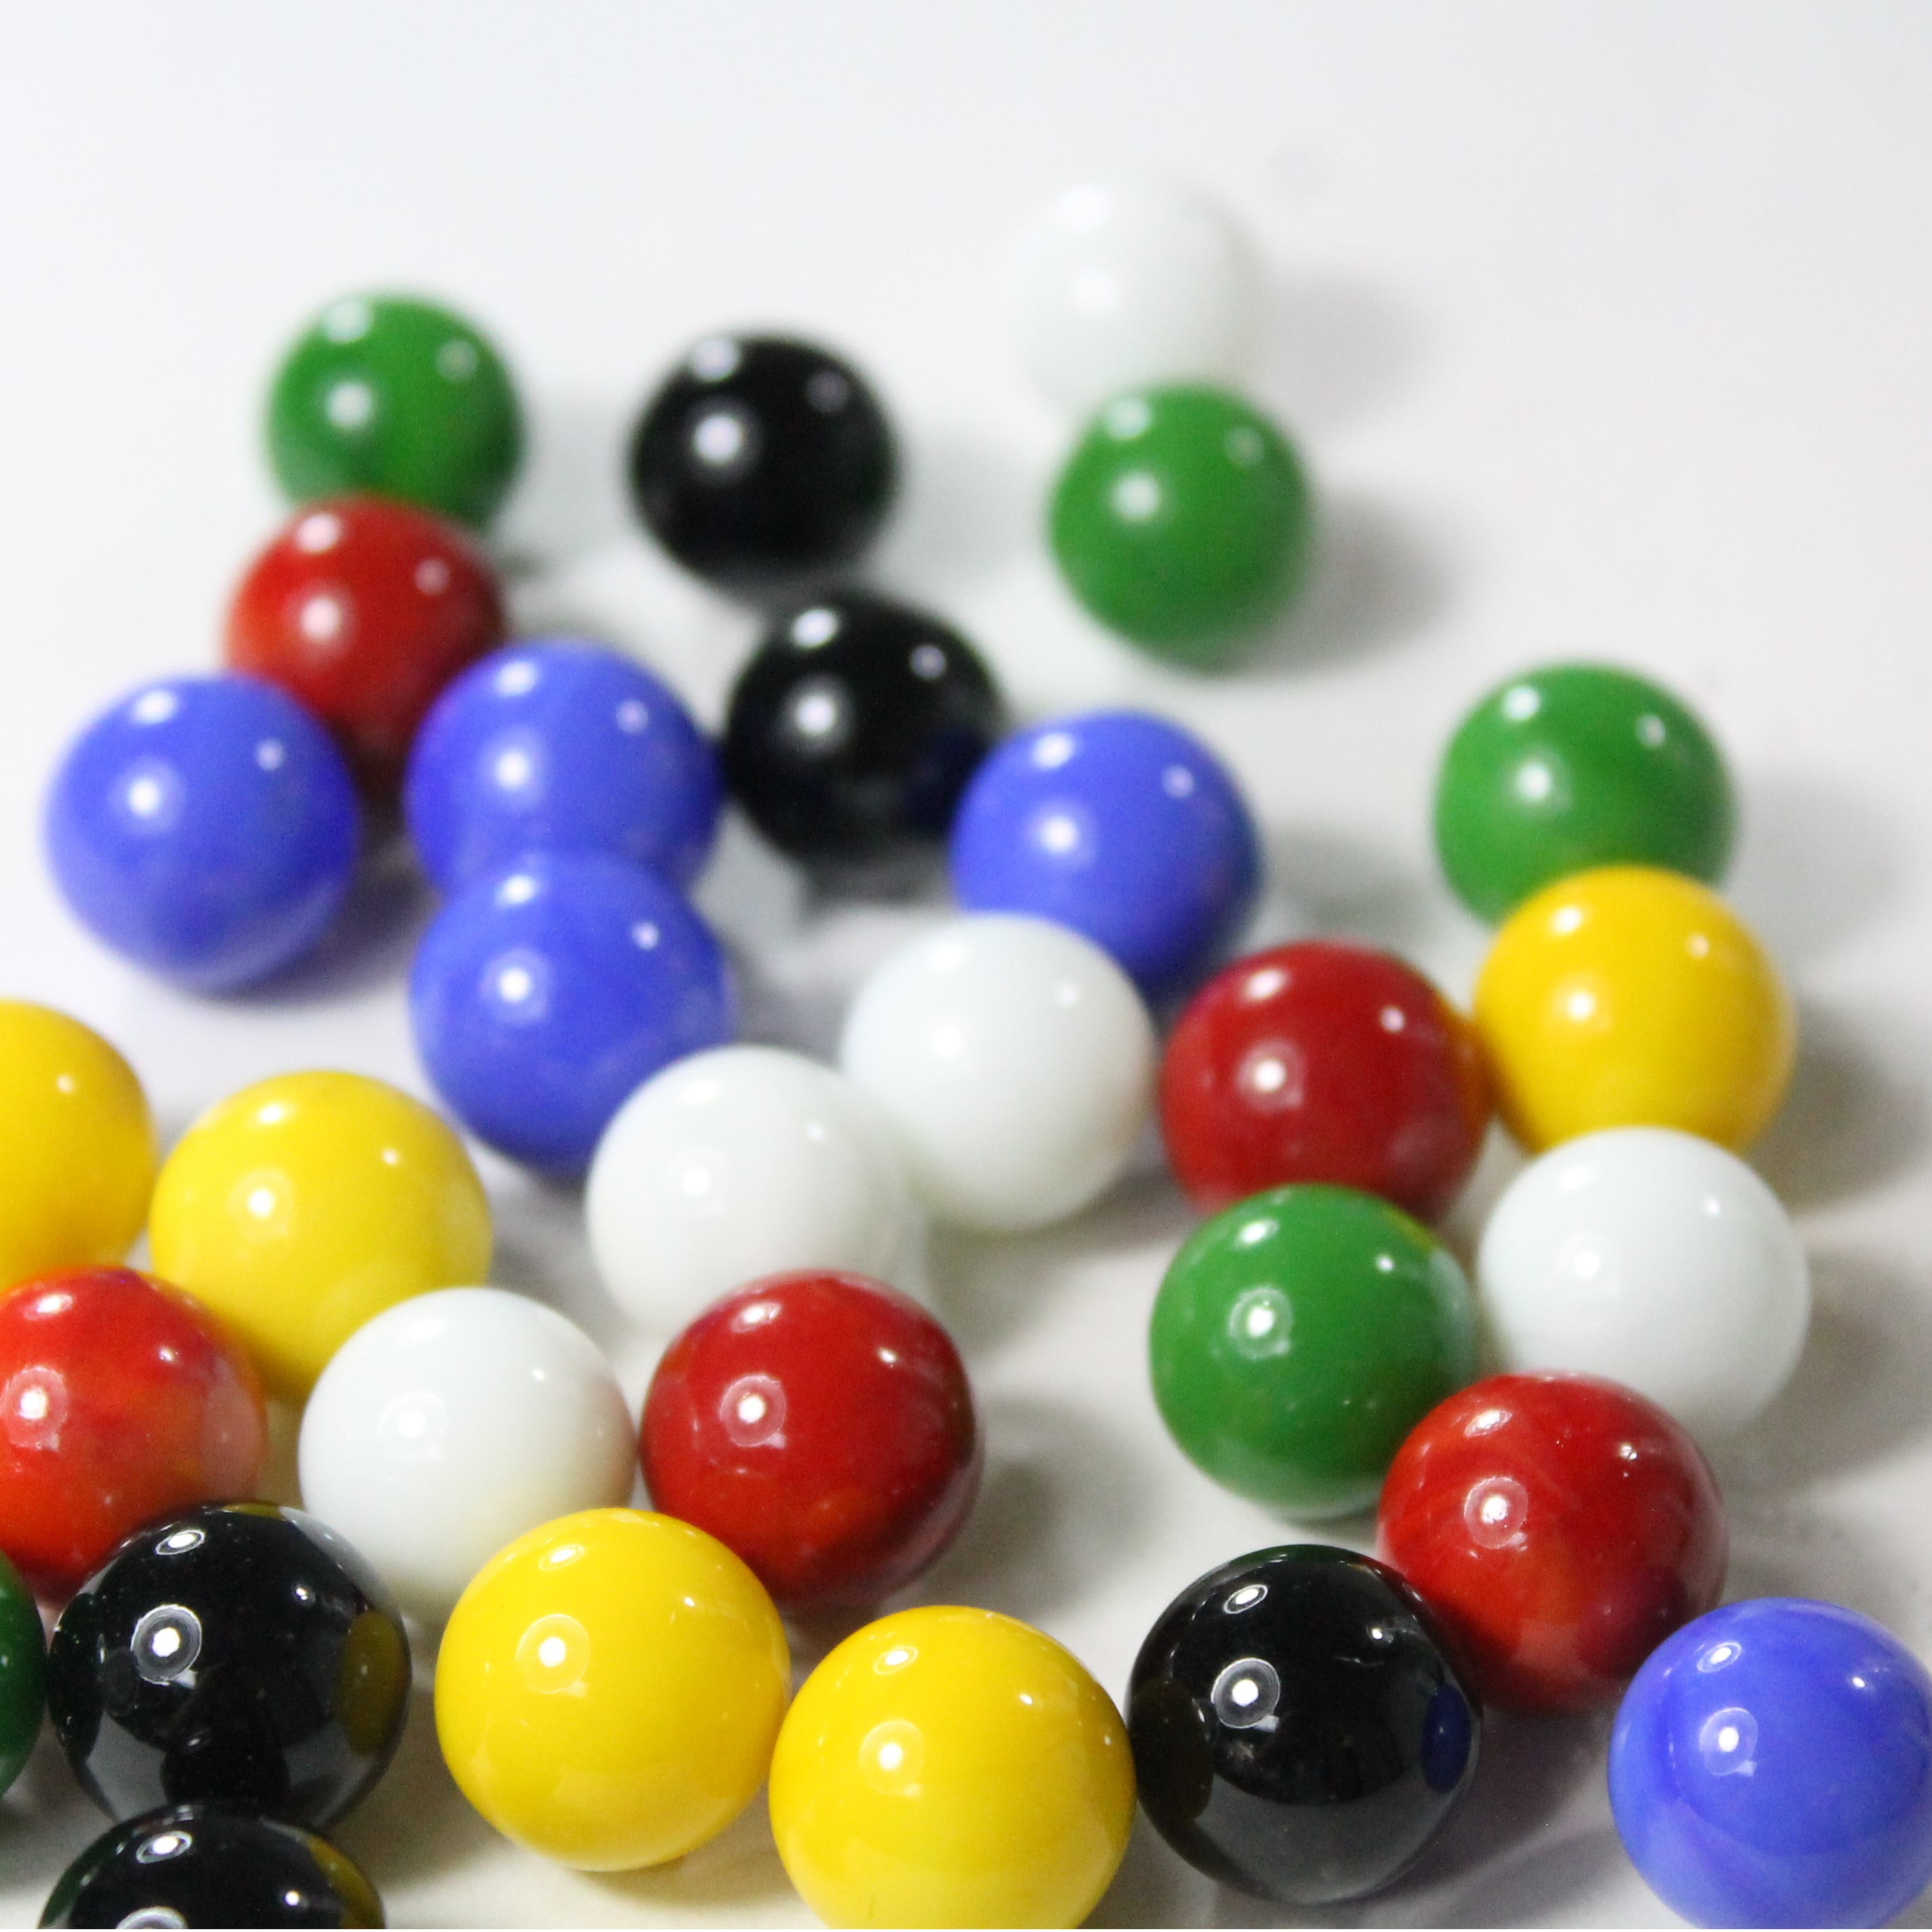 Lot 20 Marbles Antique Beachball Glass Marbles Vintage Design Art Toy Games 16mm 